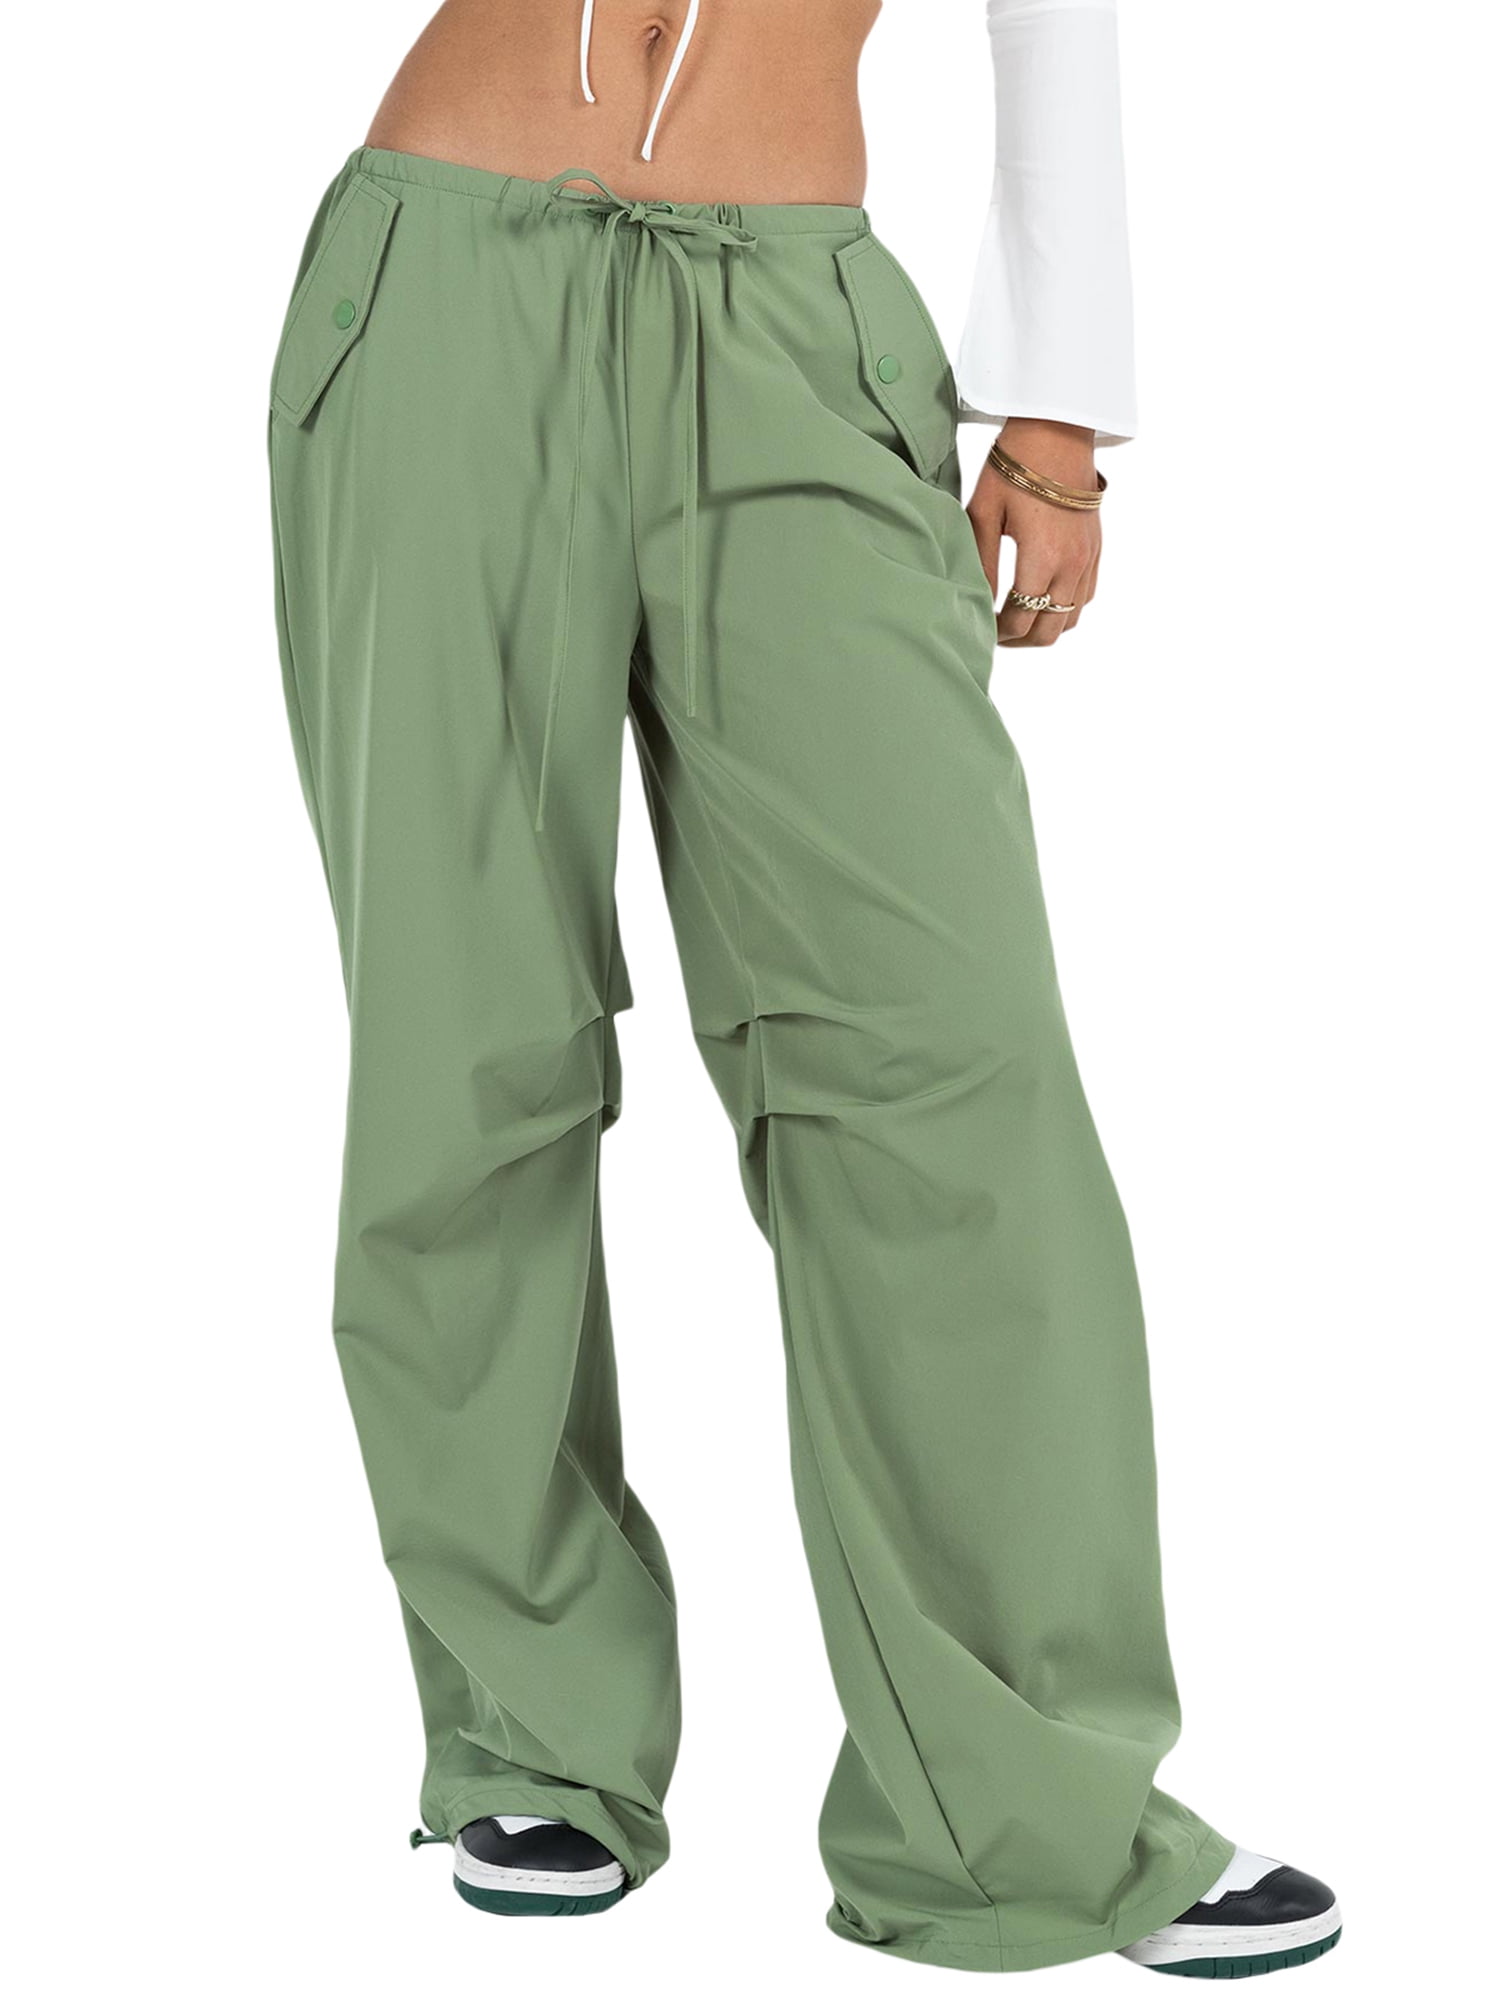 Women's Baggy Cargo Pants Drawstring Low Waist Solid Color Parachute Pants  with Pockets Streetwear 